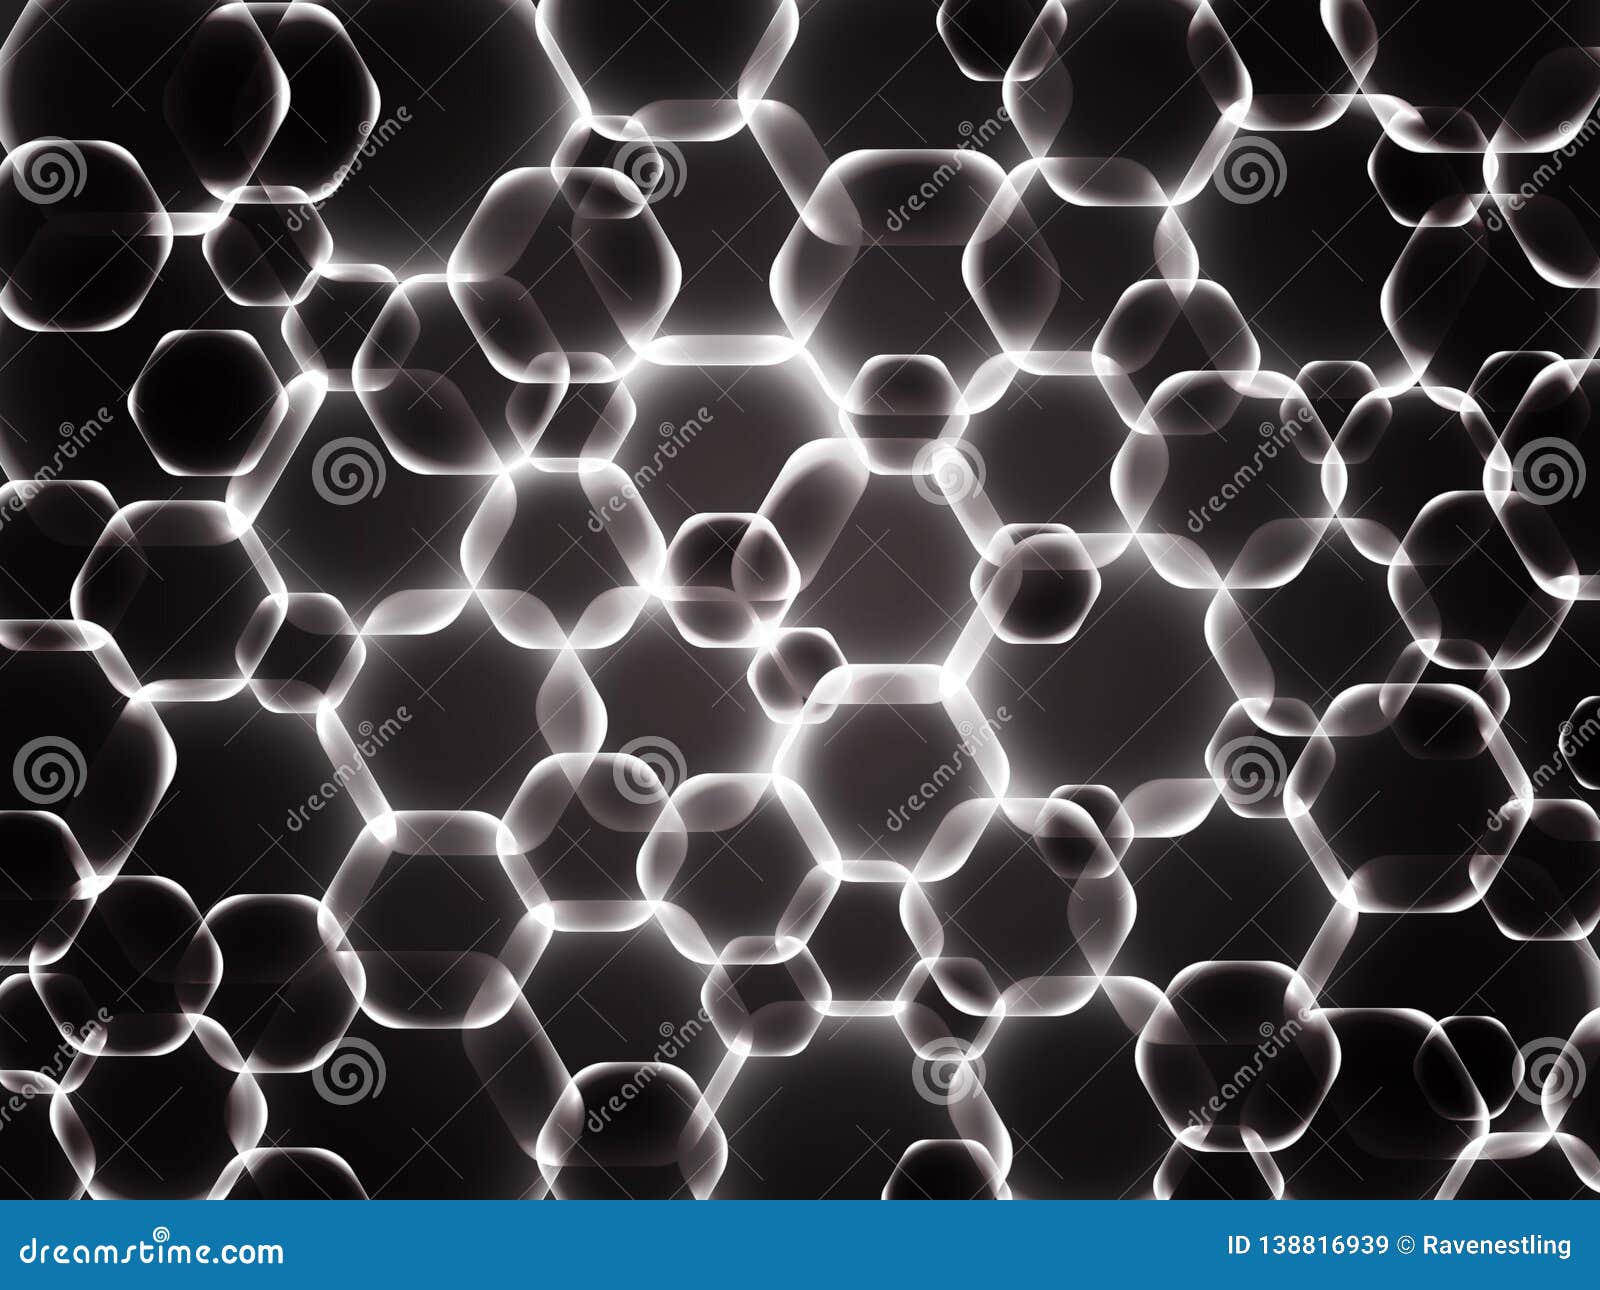 Abstract Gray Background With Dark Transparent Hexagons Stock